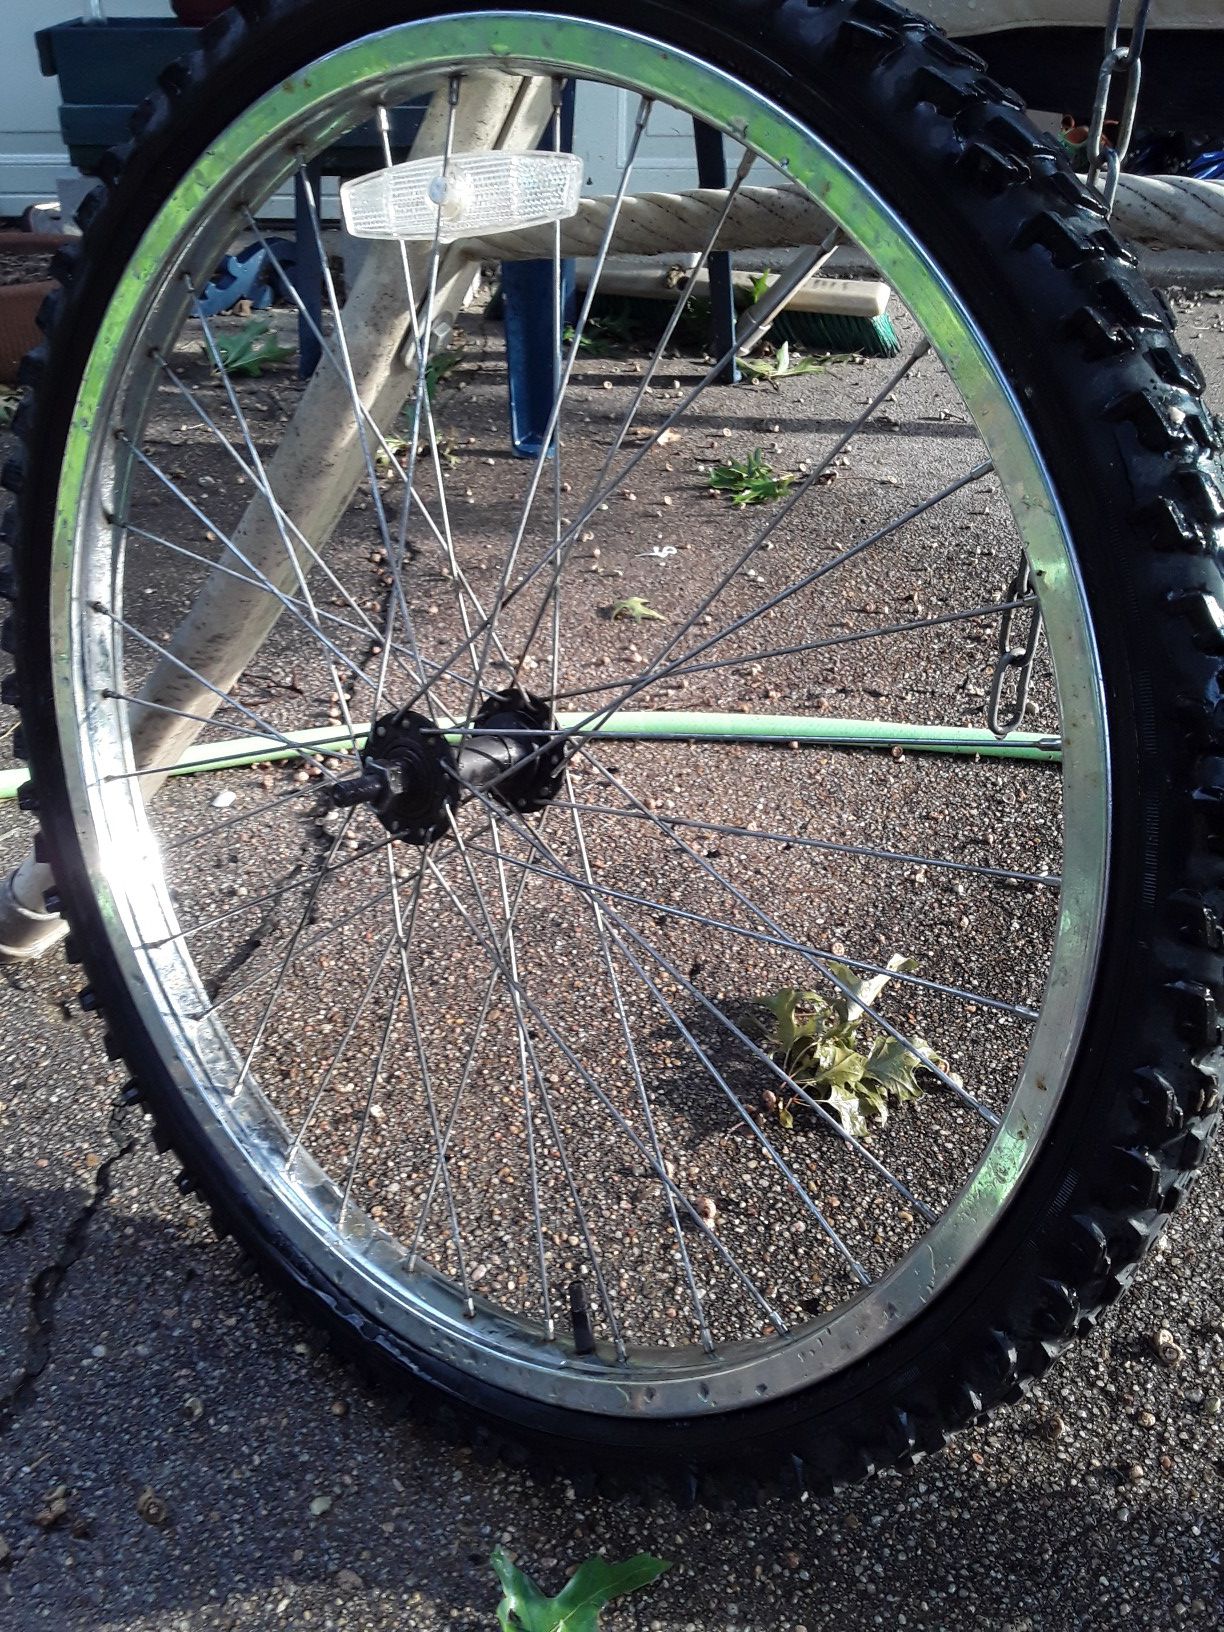 Kenda 24 x 1.95 bike tires and rims. Good condition only $10.00 each; $20.00 for the set.